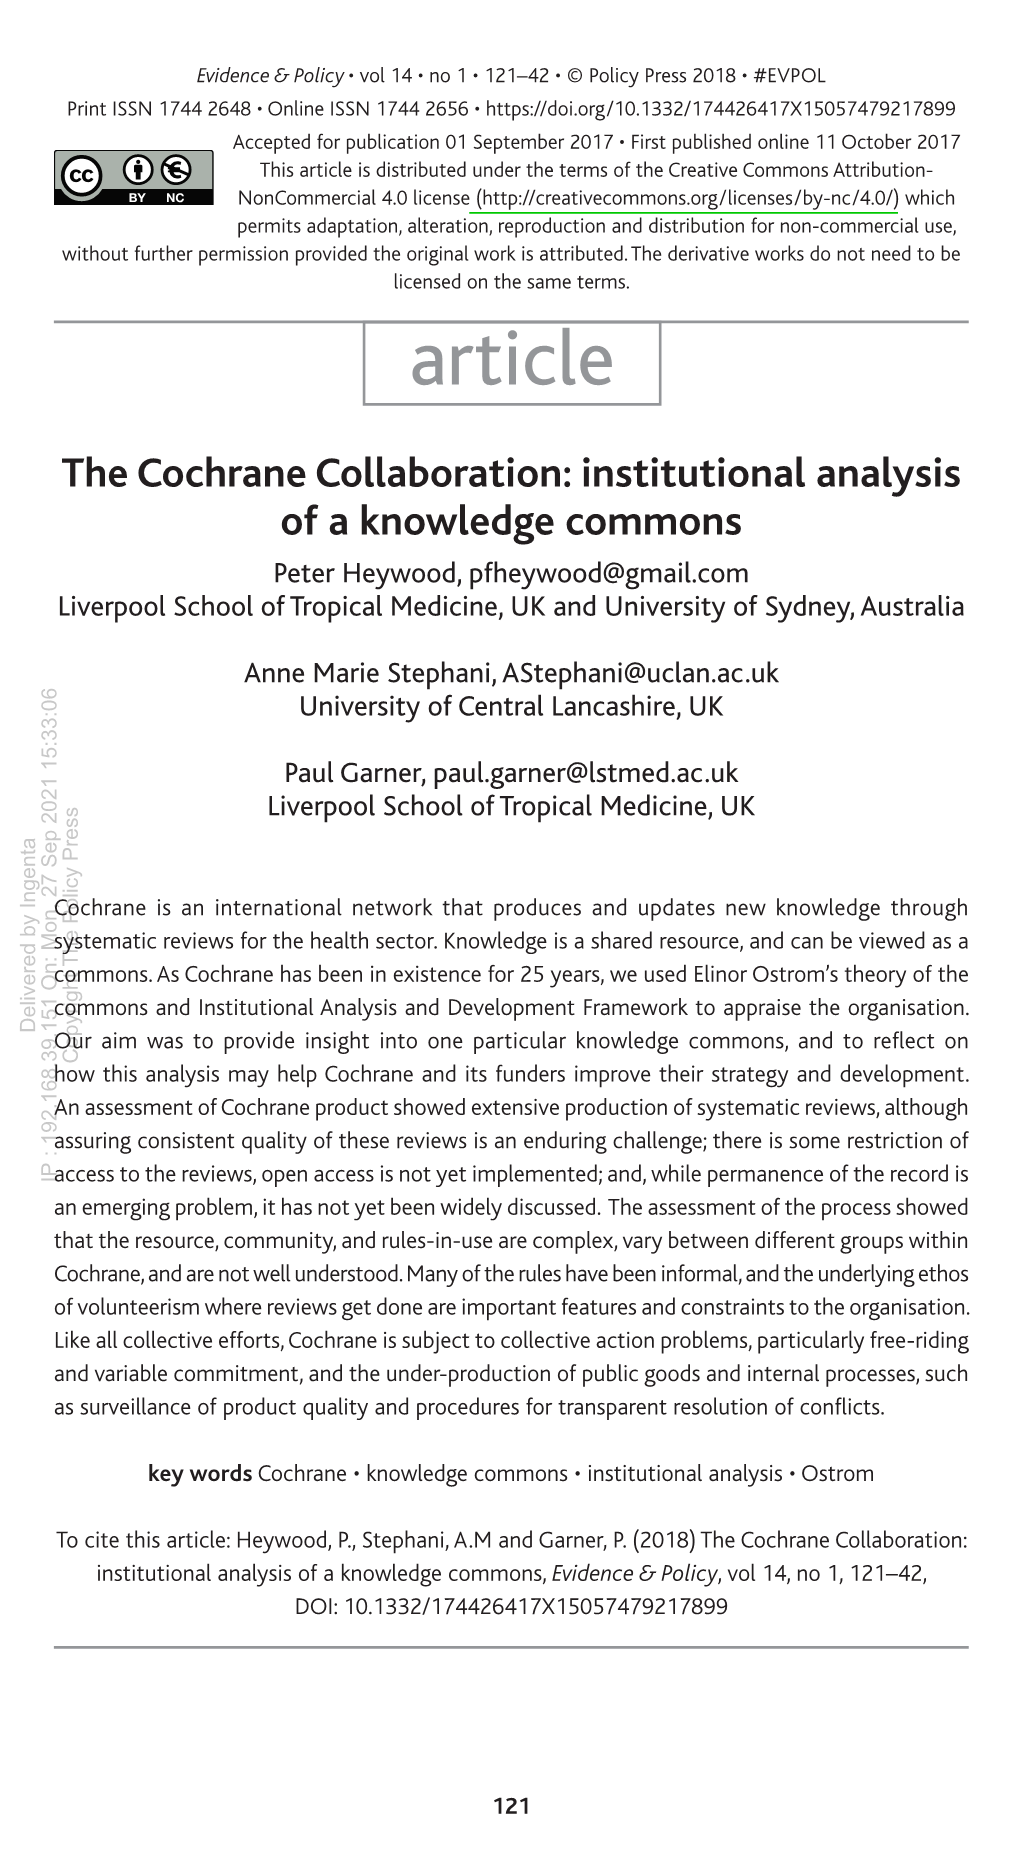 The Cochrane Collaboration: Institutional Analysis of A